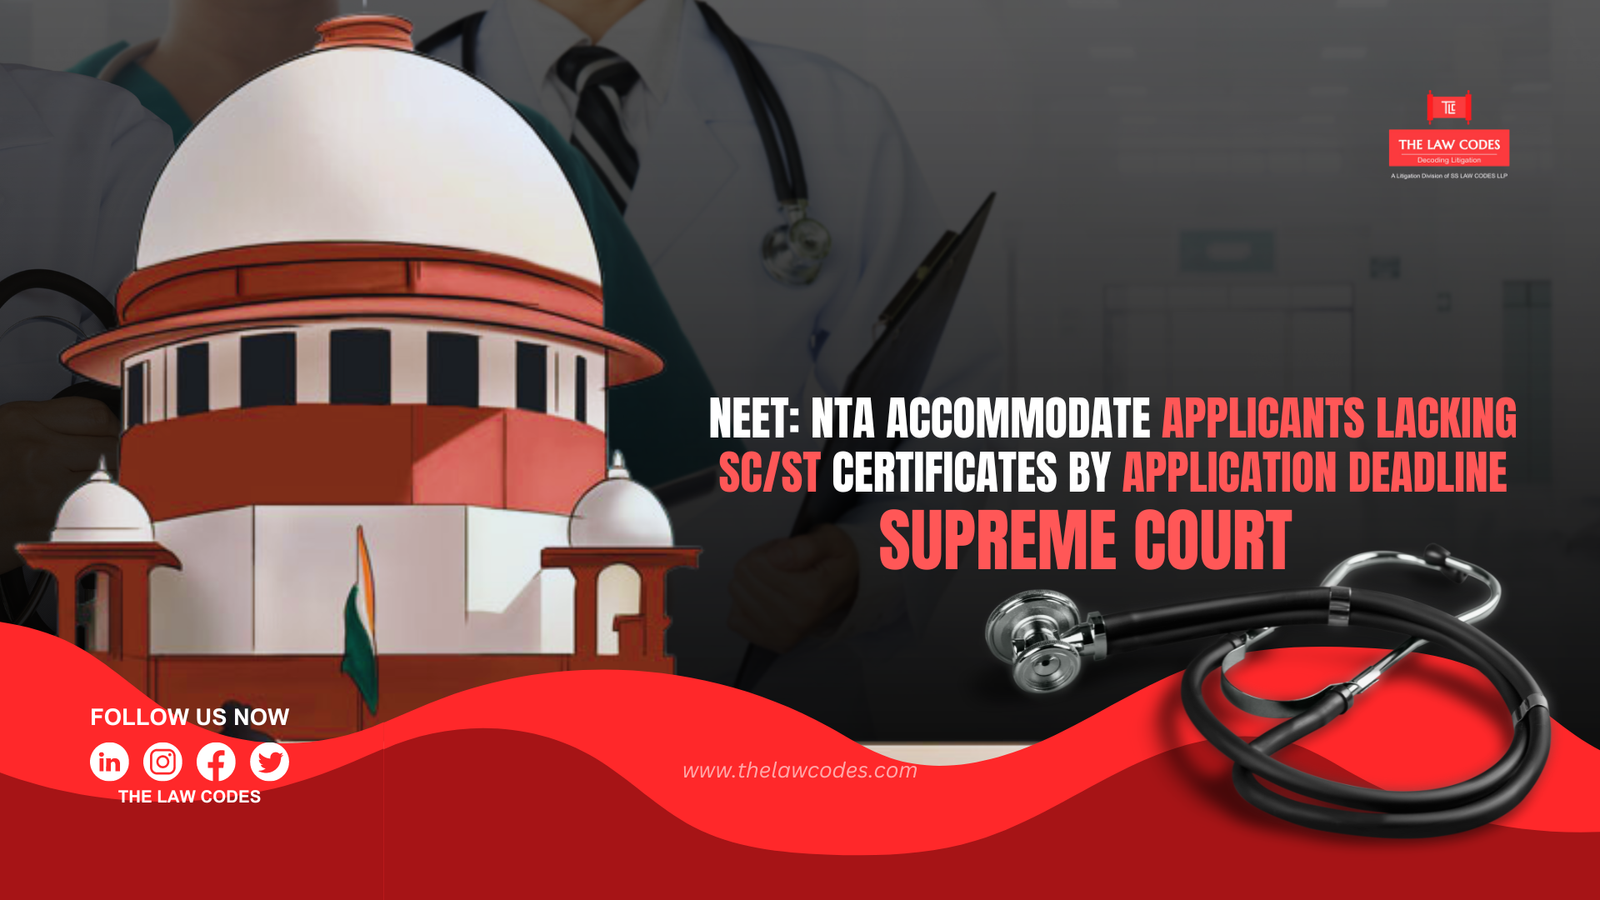 NEET: The NTA should consider accommodating candidates without SC/ST certificates as of the application deadline - Supreme Court